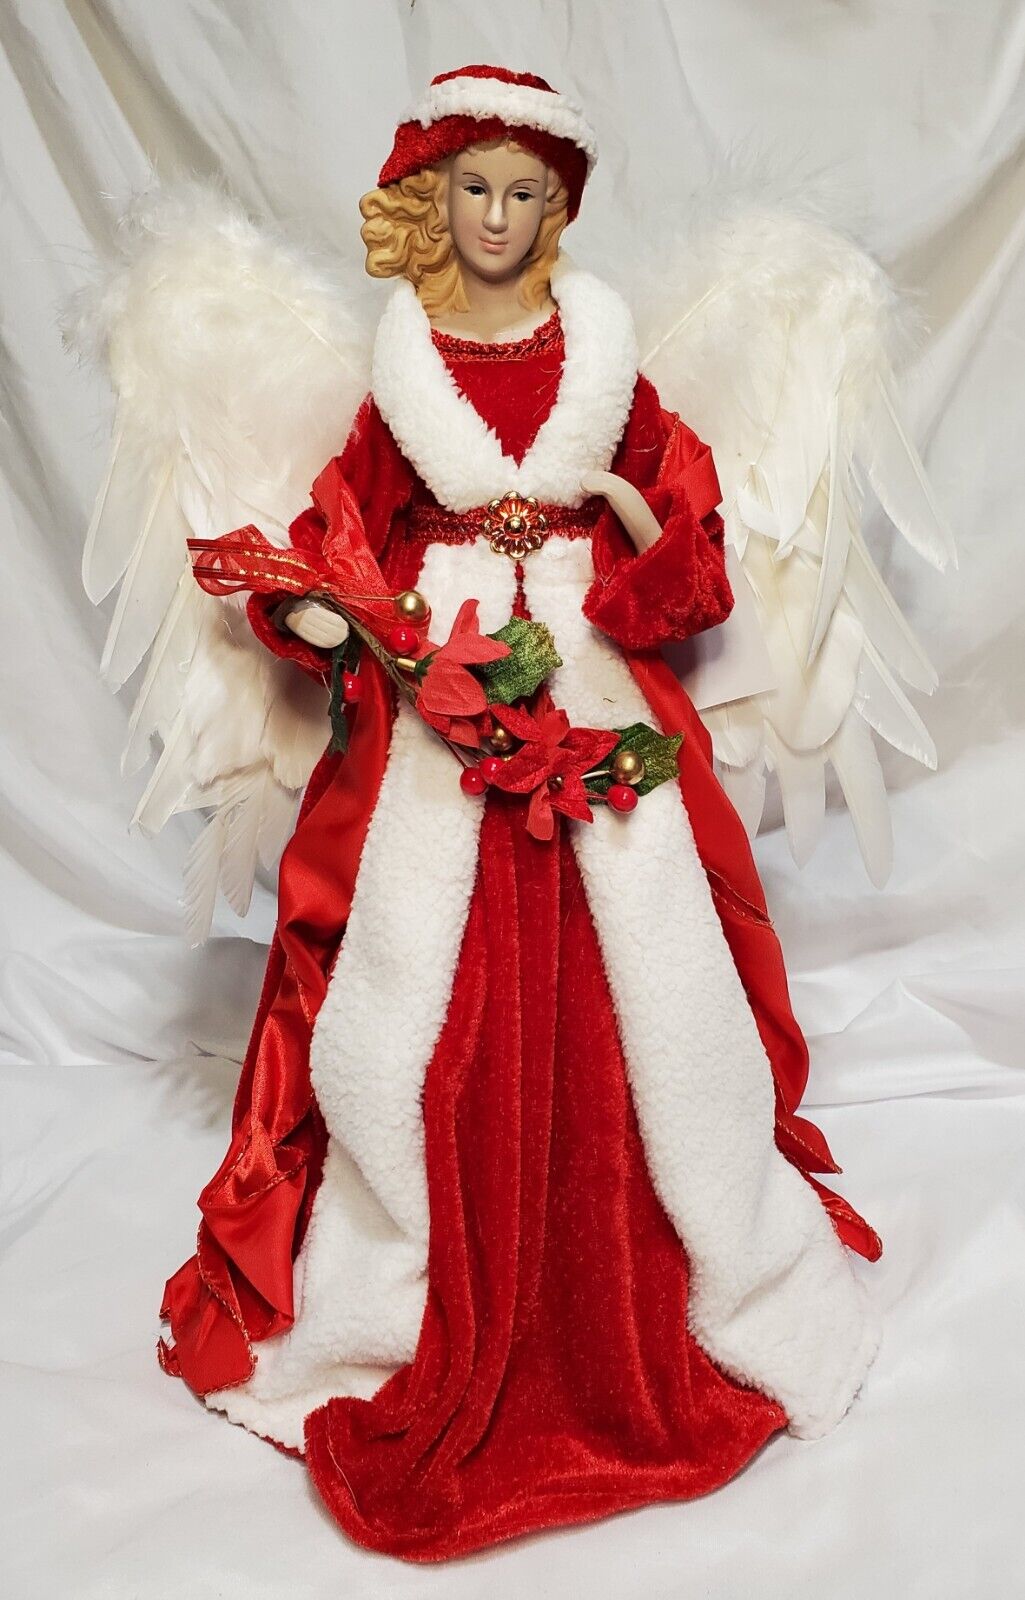 Hobby Lobby Angel Christmas Tree Topper Red Dress, Feather Wings, Porcelain Head